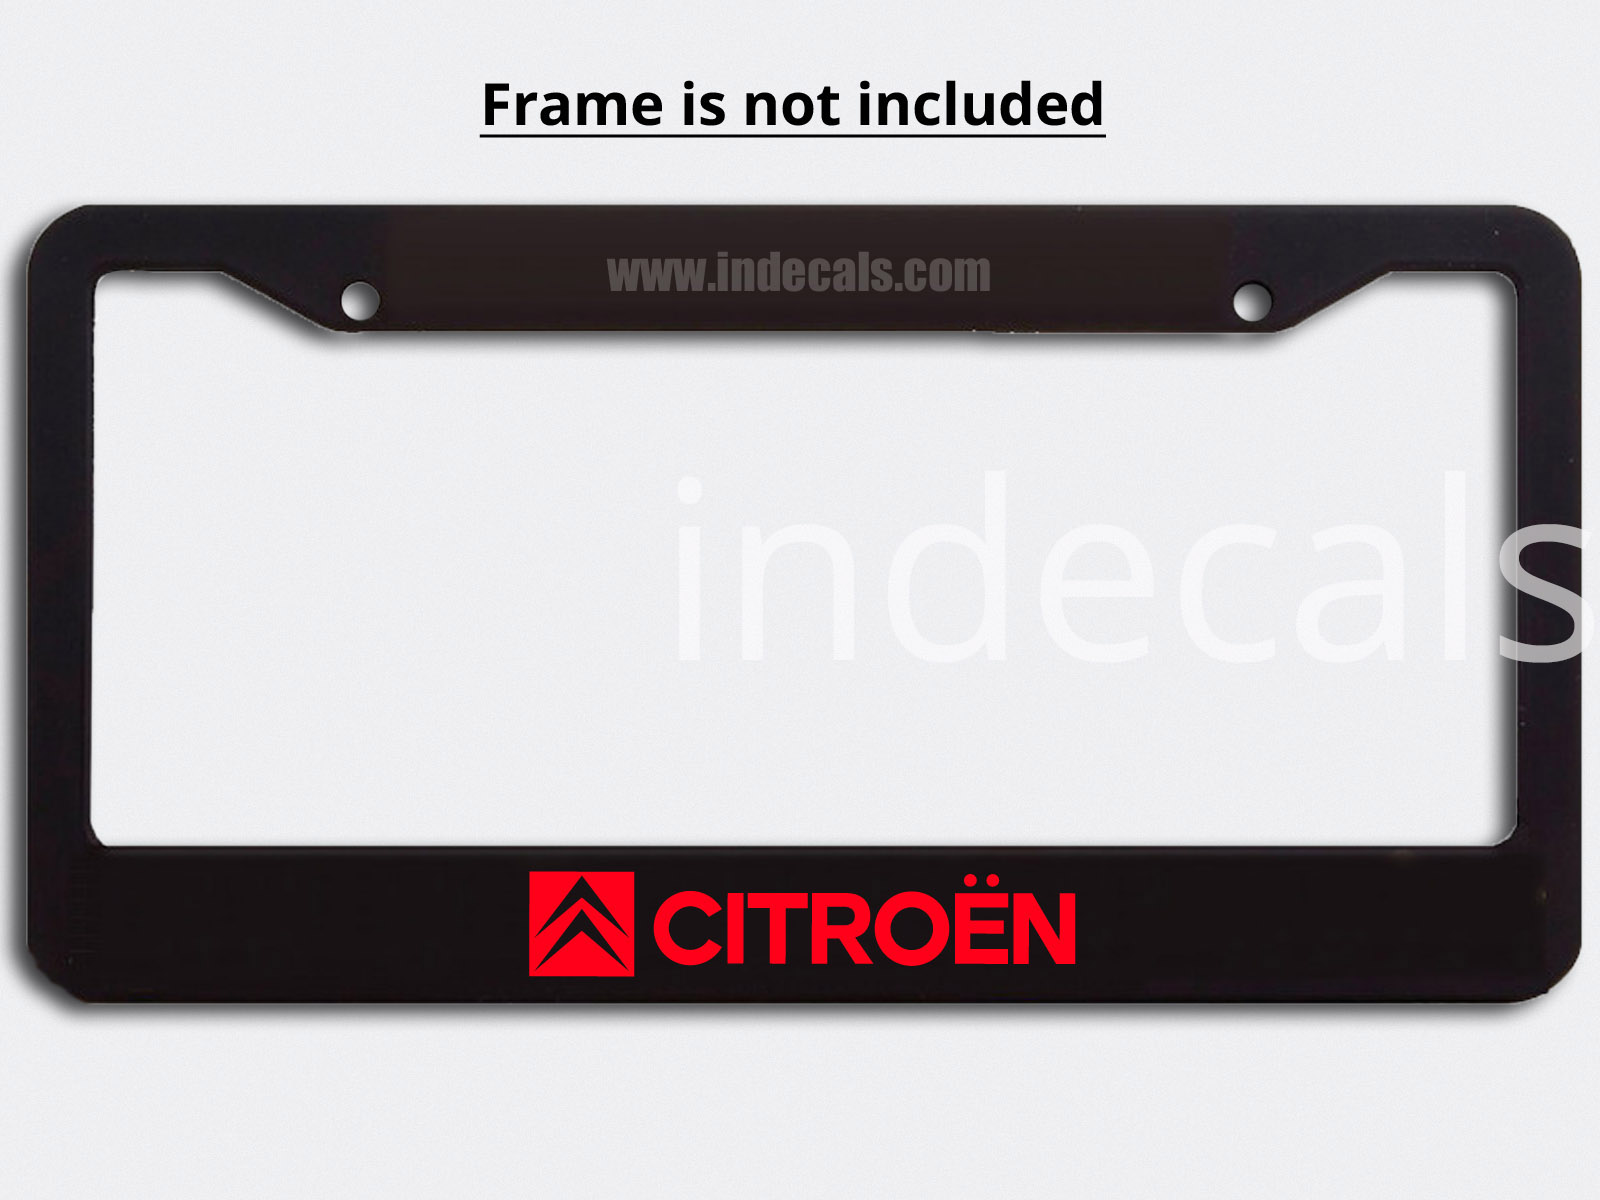 3 x Citroen Stickers for Plate Frame - Red